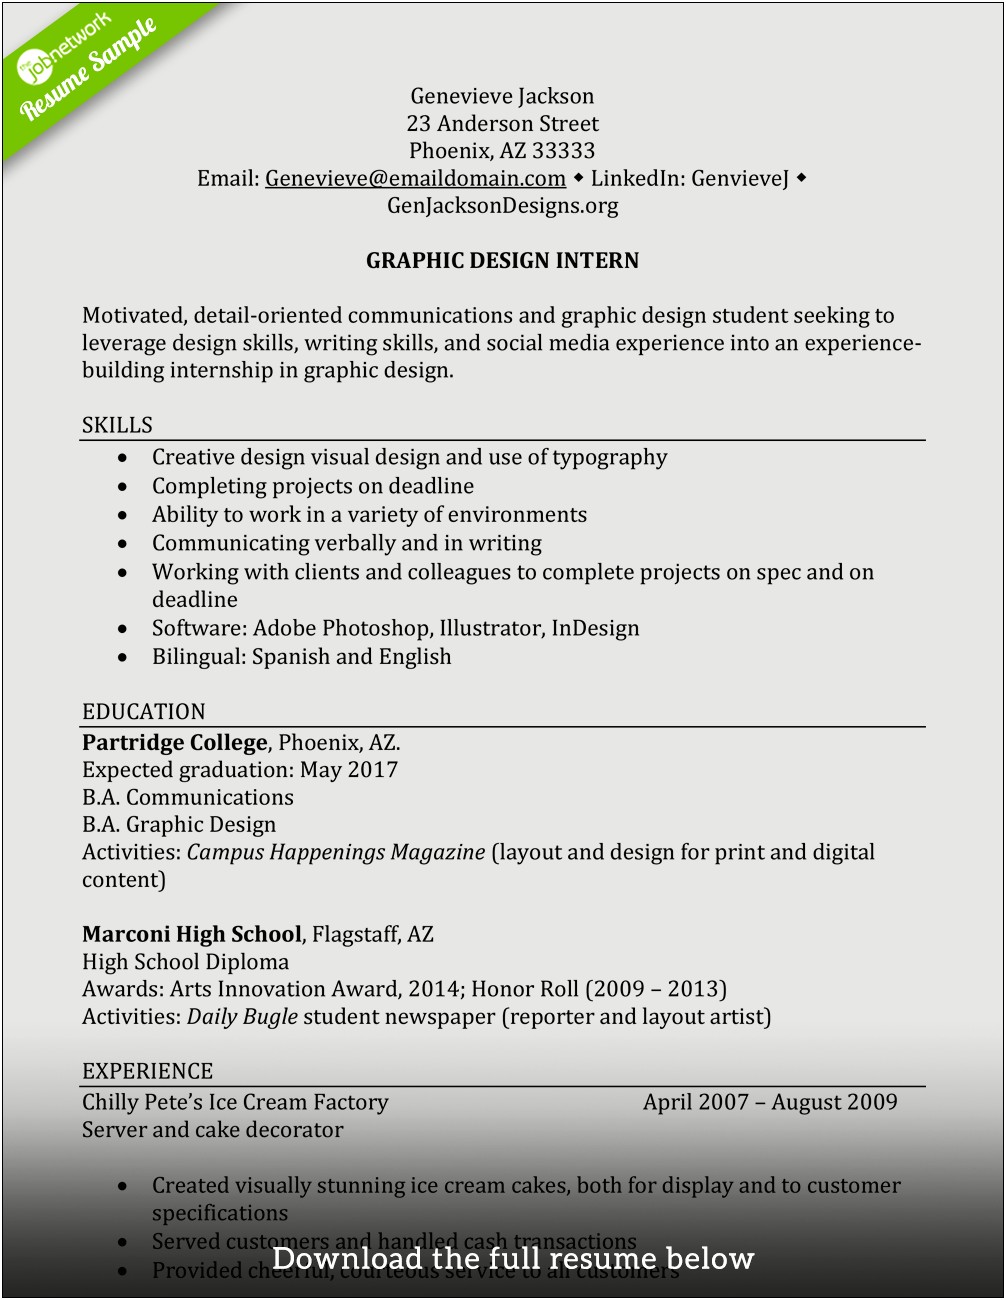 Creating An Education Resume With No Education Experience